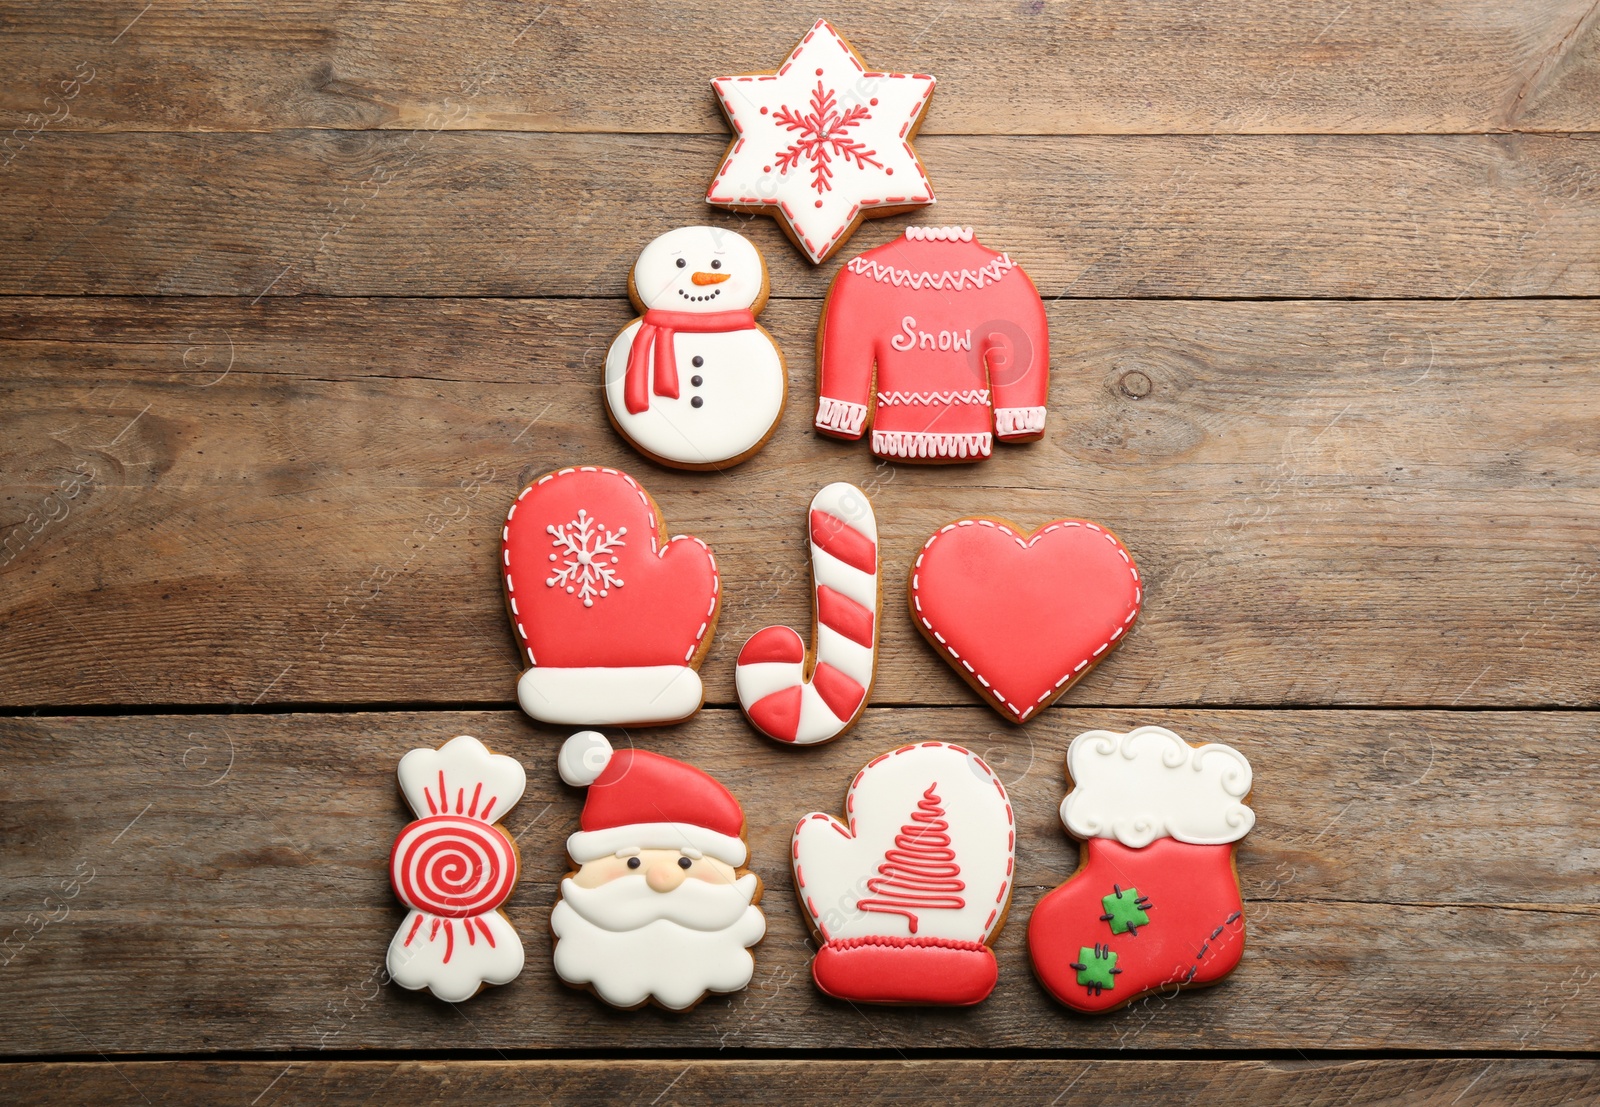 Photo of Christmas tree shape made of delicious decorated gingerbread cookies on wooden table, flat lay